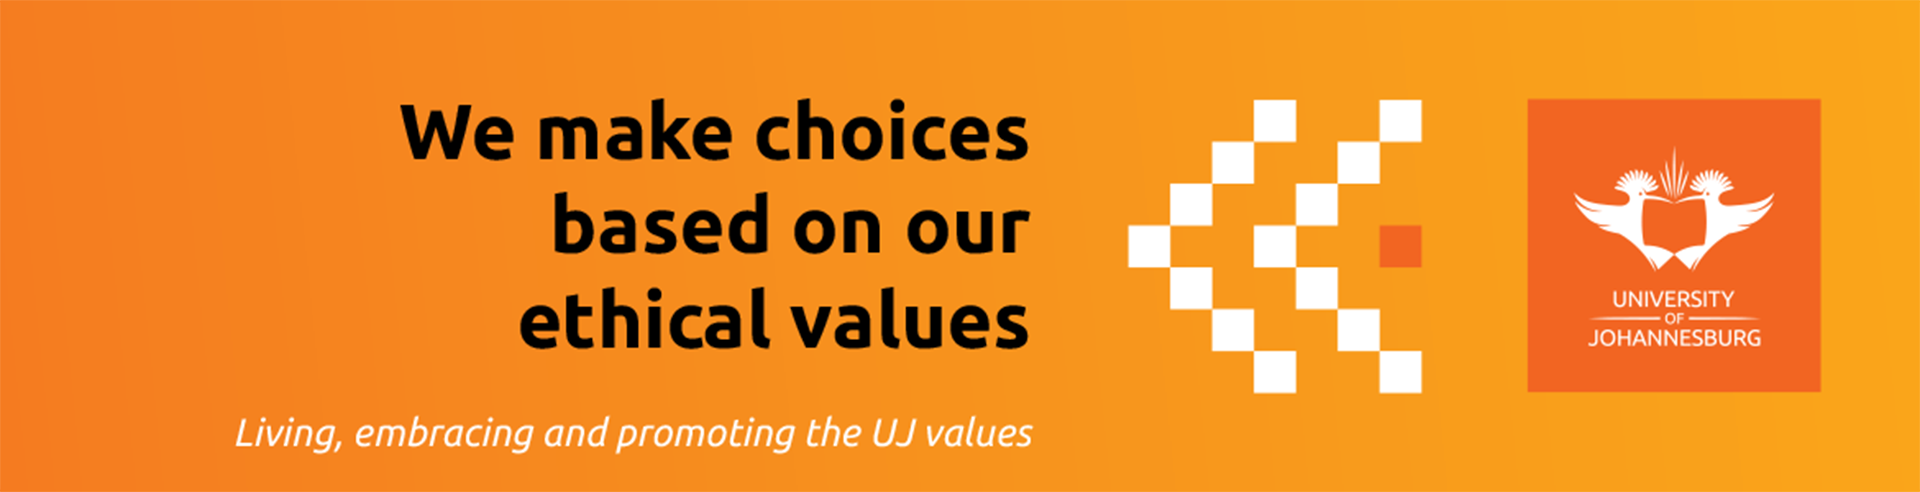 Uj Values Expressions Posters 2020 Ulink 1170x300mm 30